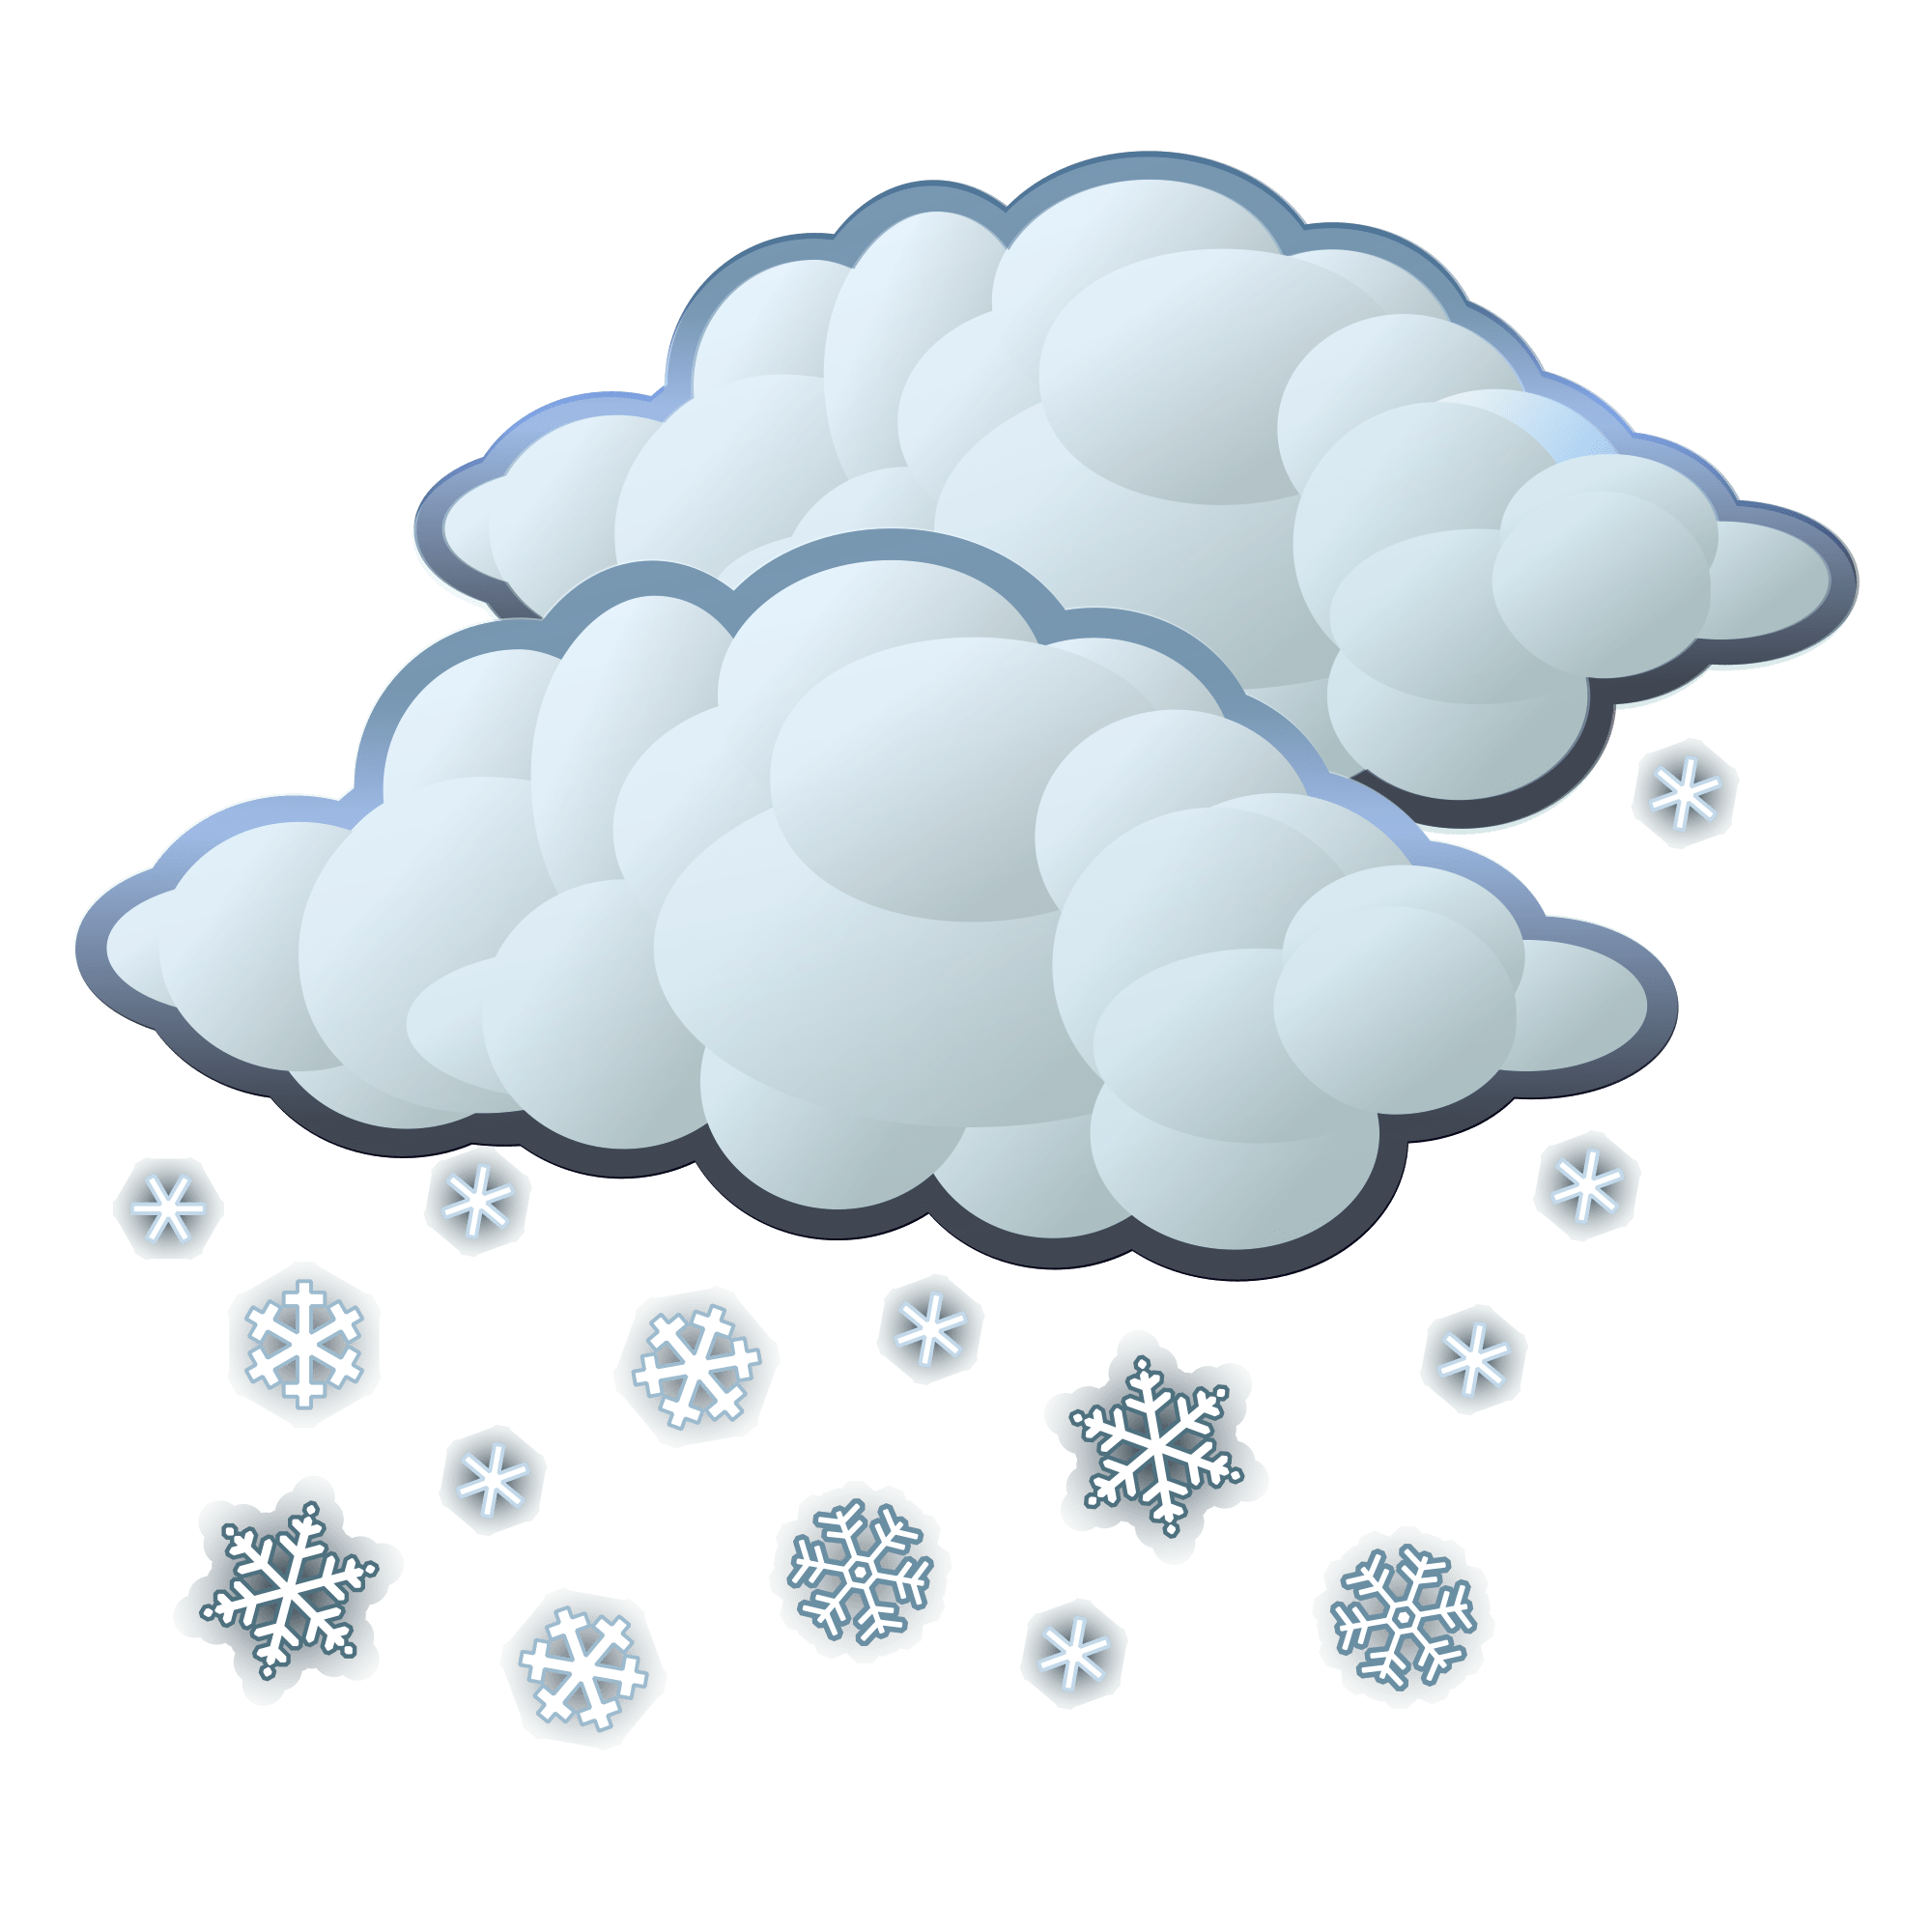 Snow Clipart Snow Crystal - Animated Snowflakes Transparent PNG - Clip ...